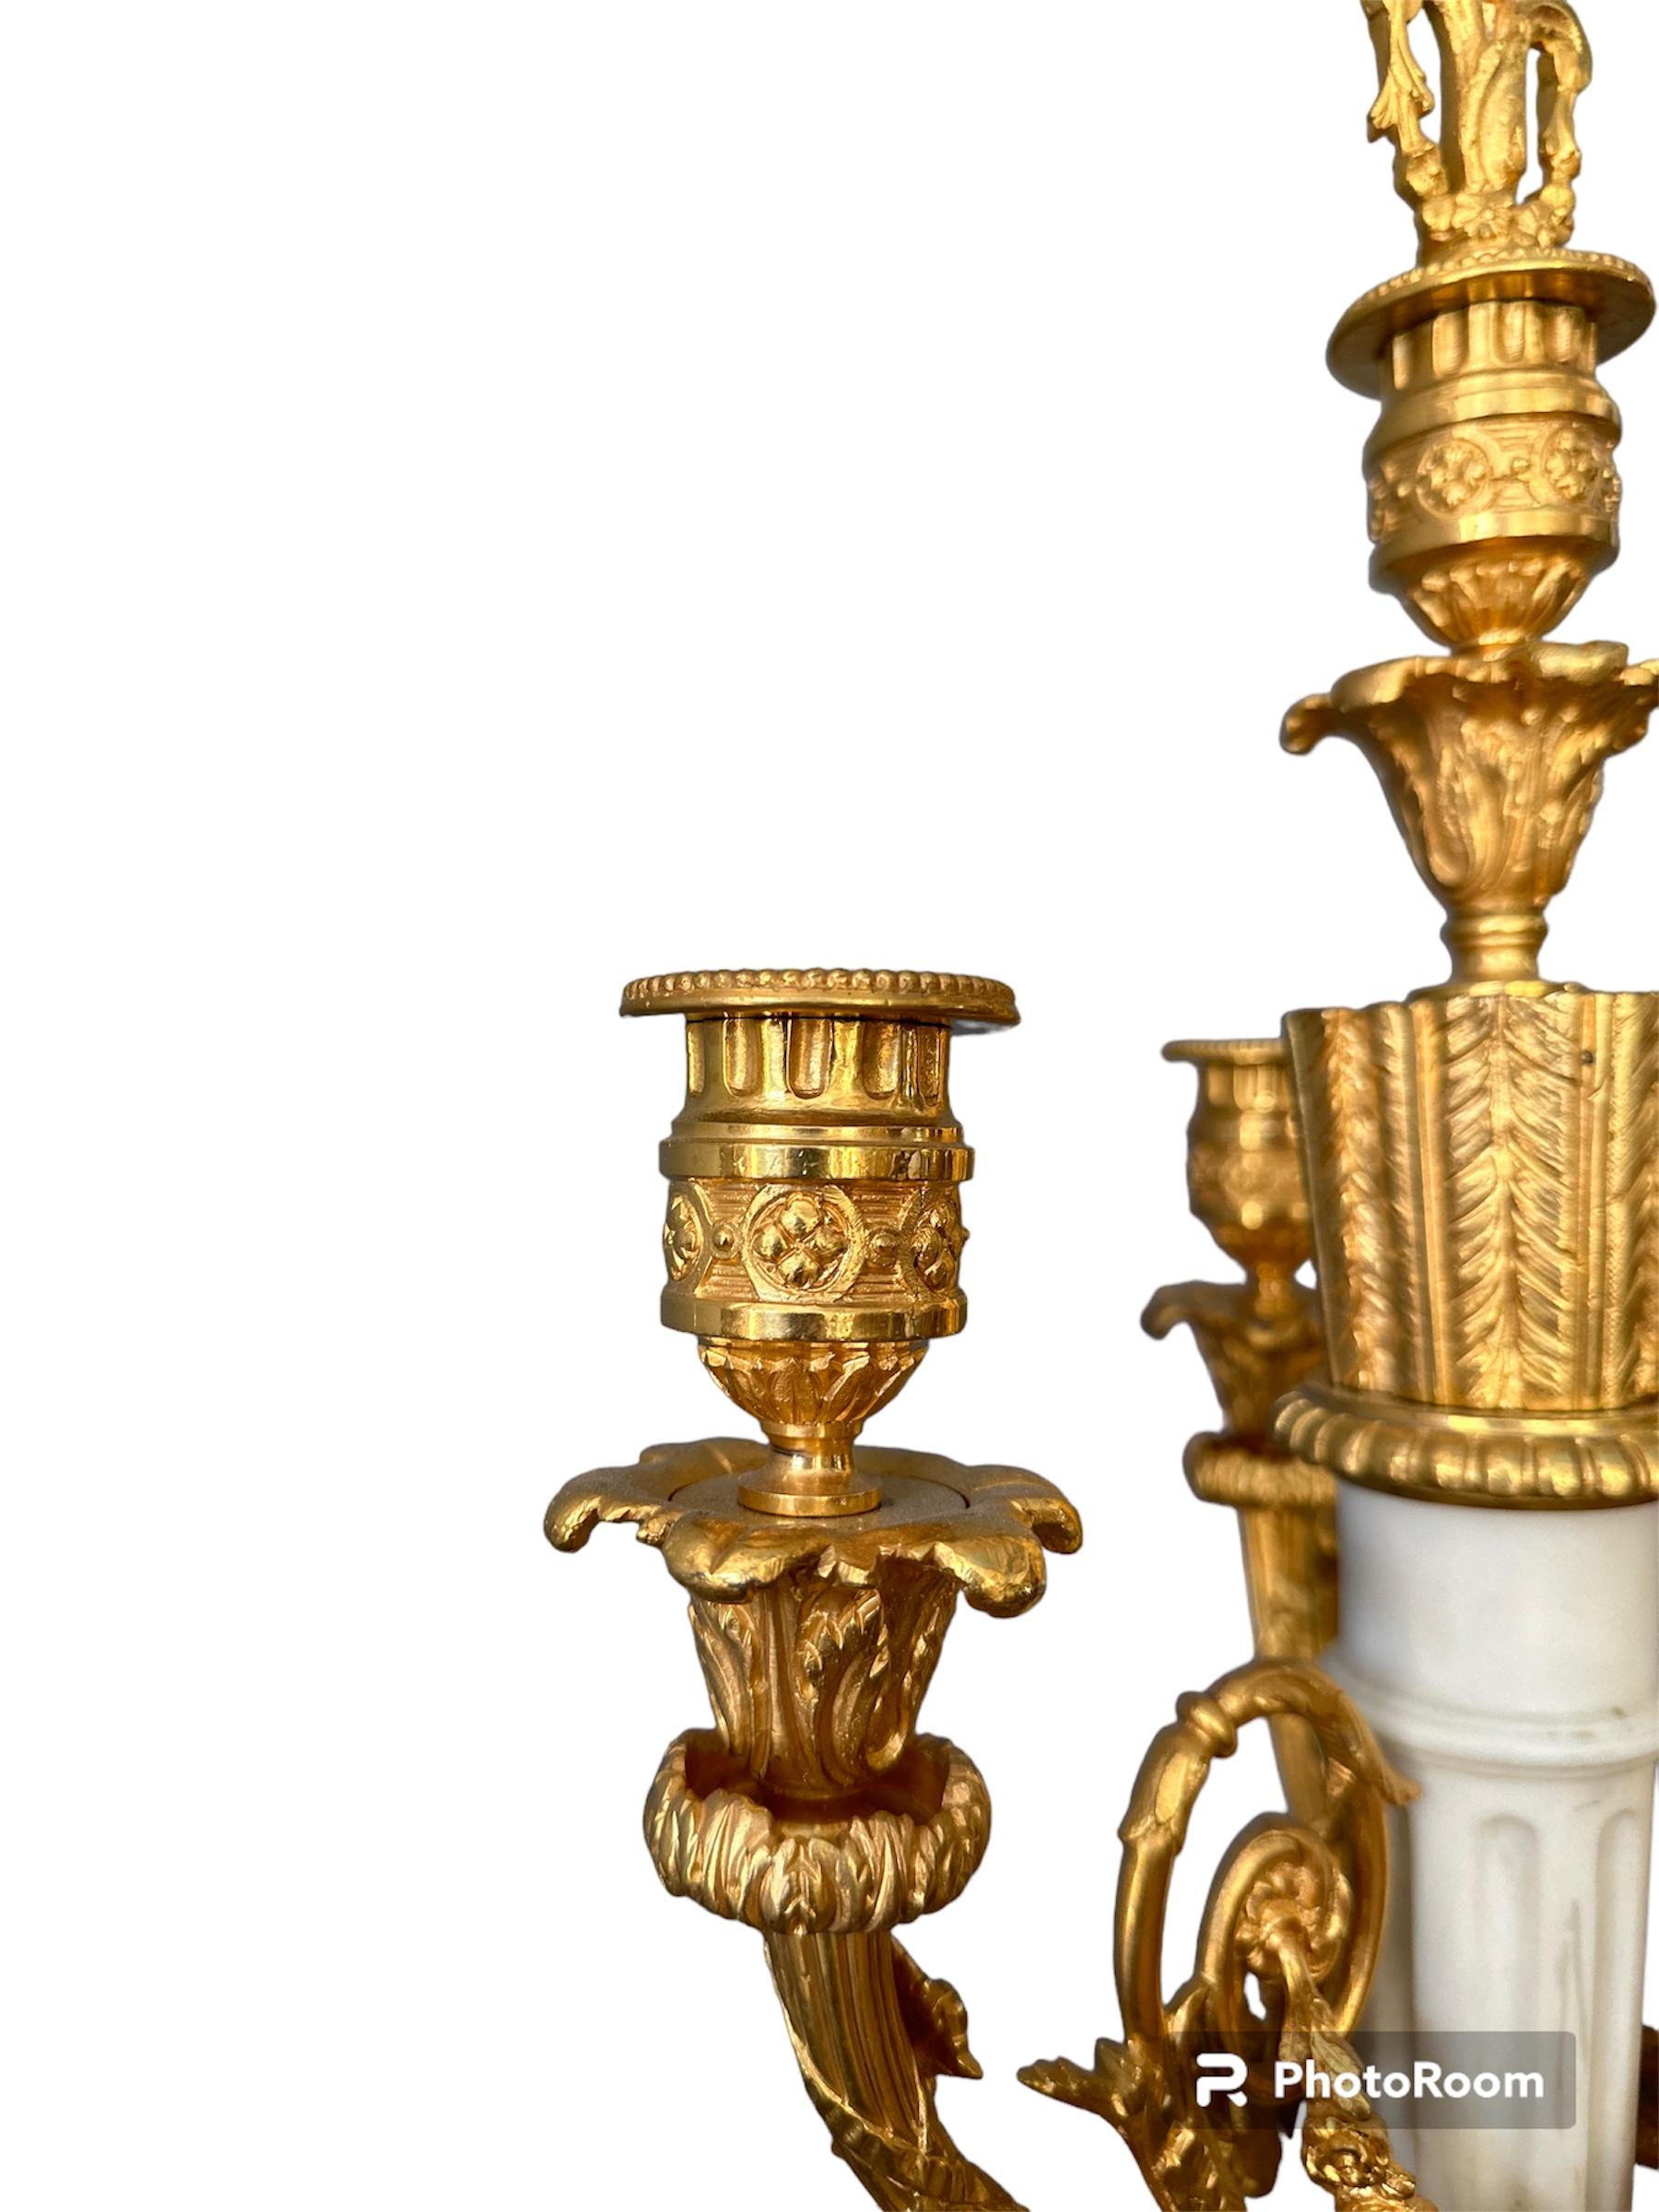 19th century, Napoleon III, Copy of Gilt Bronze and Marble Candelabra For Sale 1